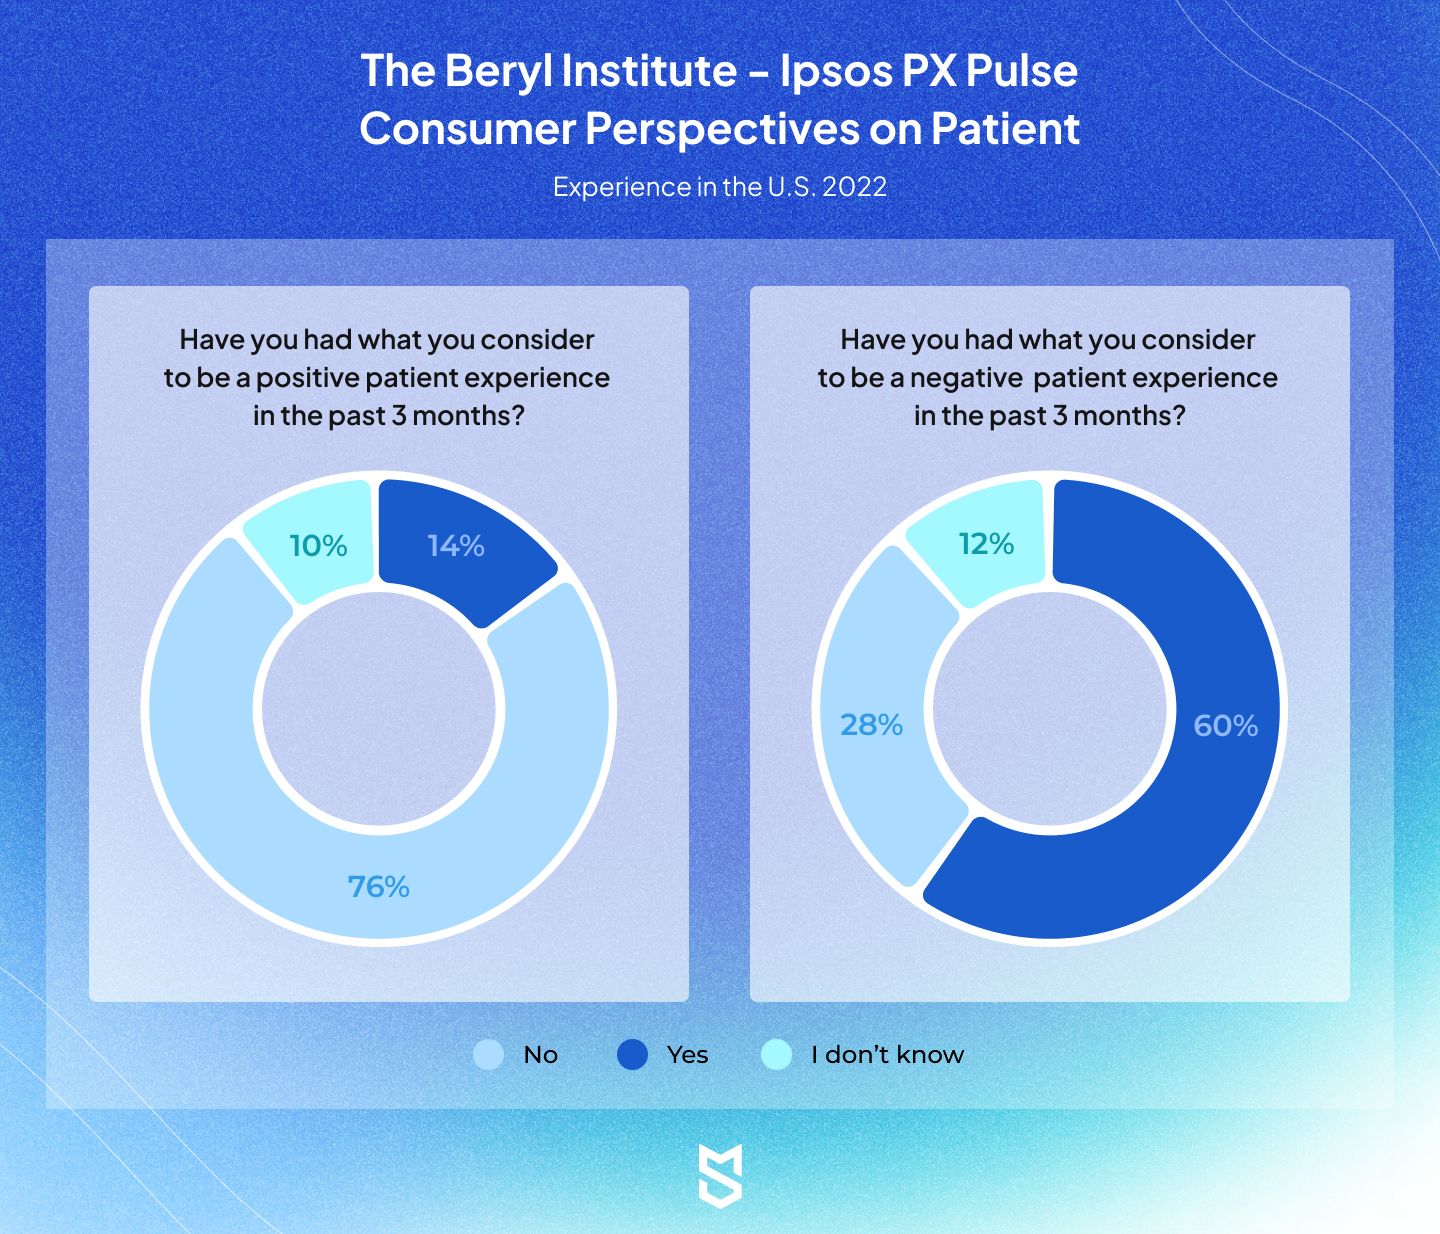 The Beryl Institute - Ipsos PX Pulse Consumer Perspectives on Patient. Experience in the U.S. 2022